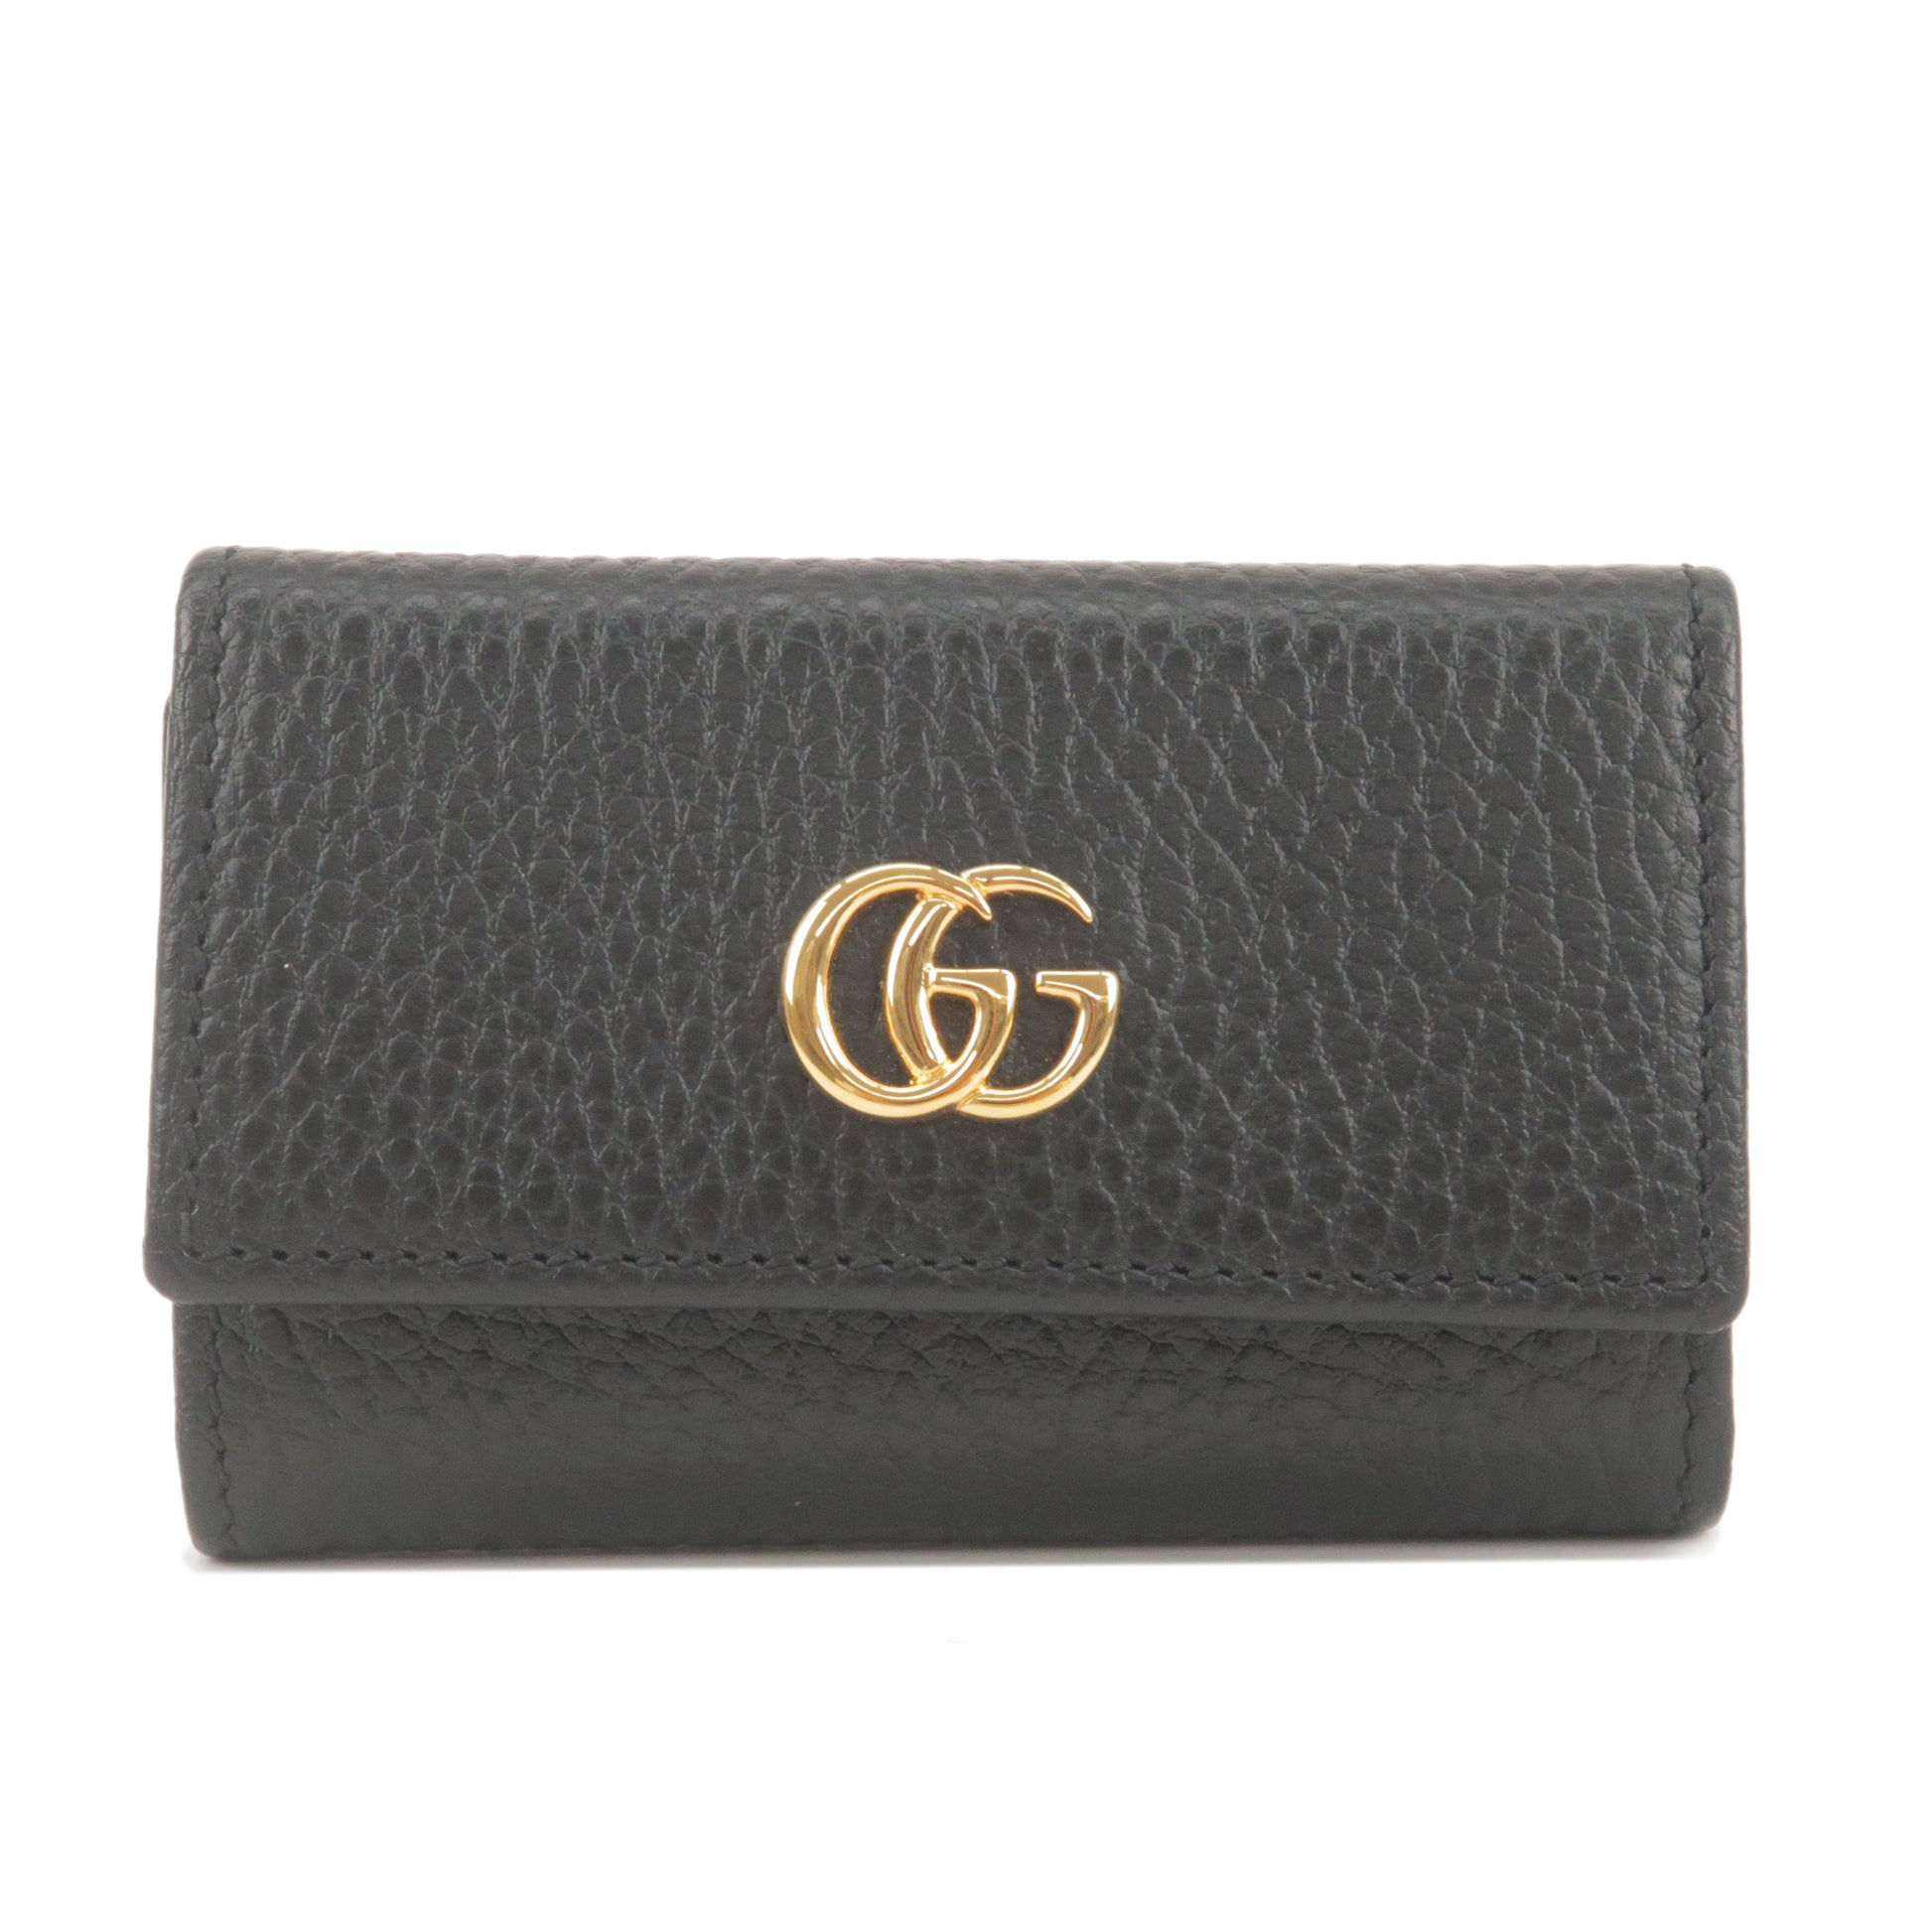 GUCCI-GG-Marmont-Leather-6-Rings-Key-Case-Key-Holder-Black-456118